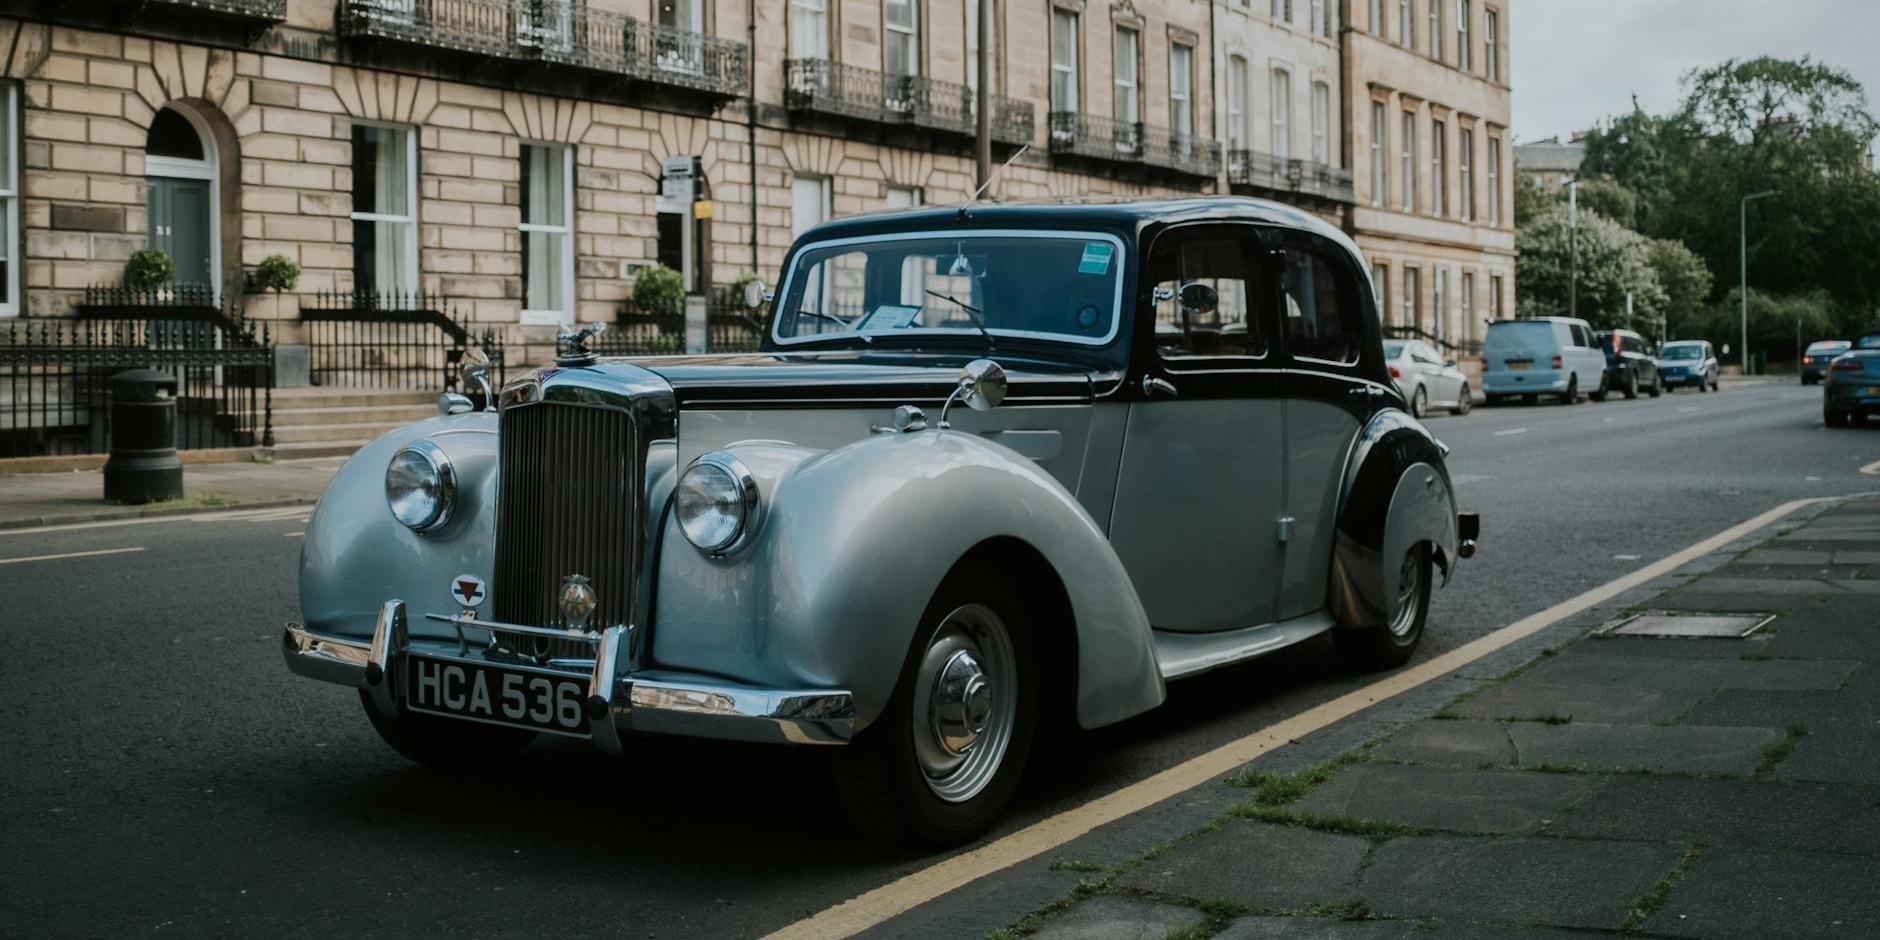 Navigating Wedding Car Hire Options: What to Ask Before You Book